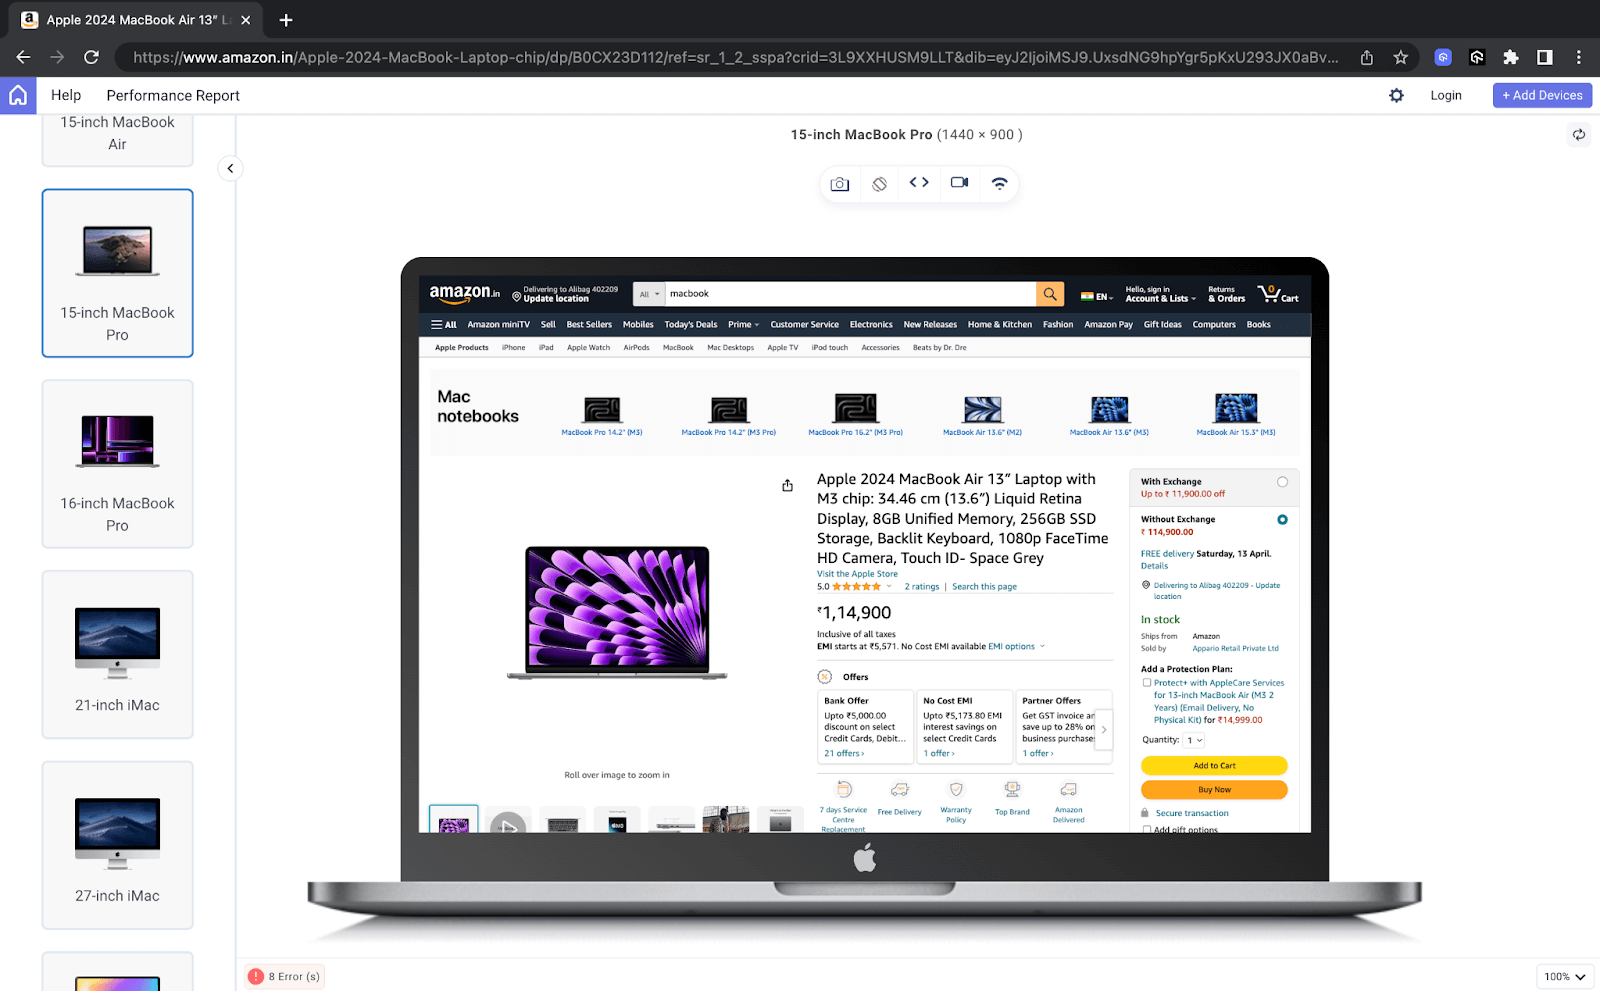 How Amazon uses padding on its product page